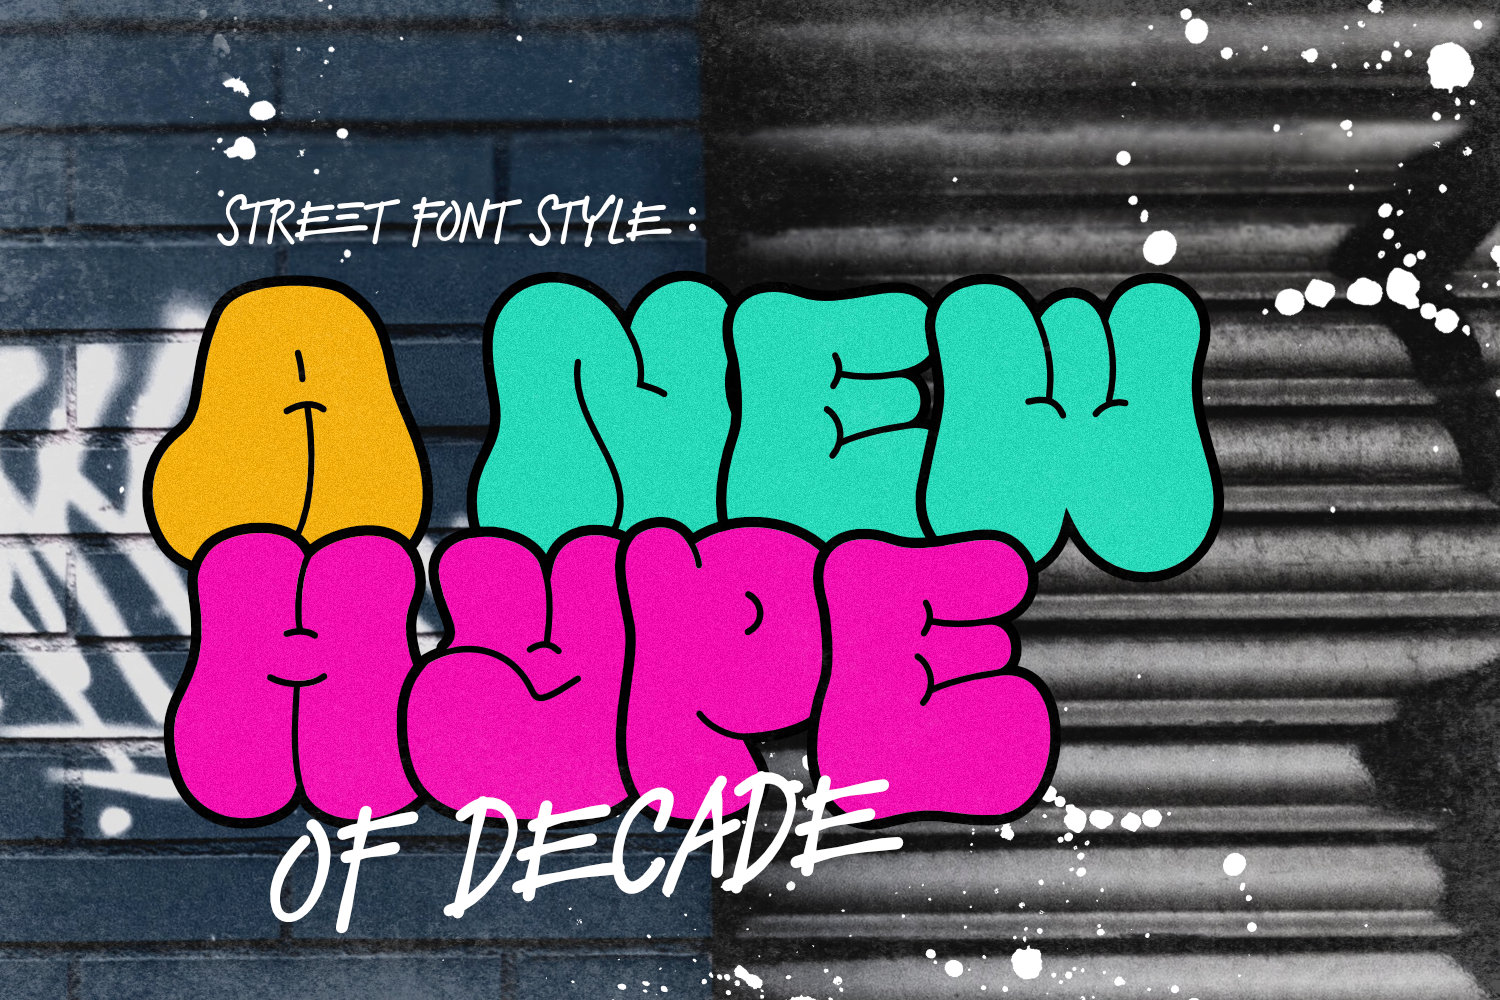 Street Font Style : A New Hype of Decade